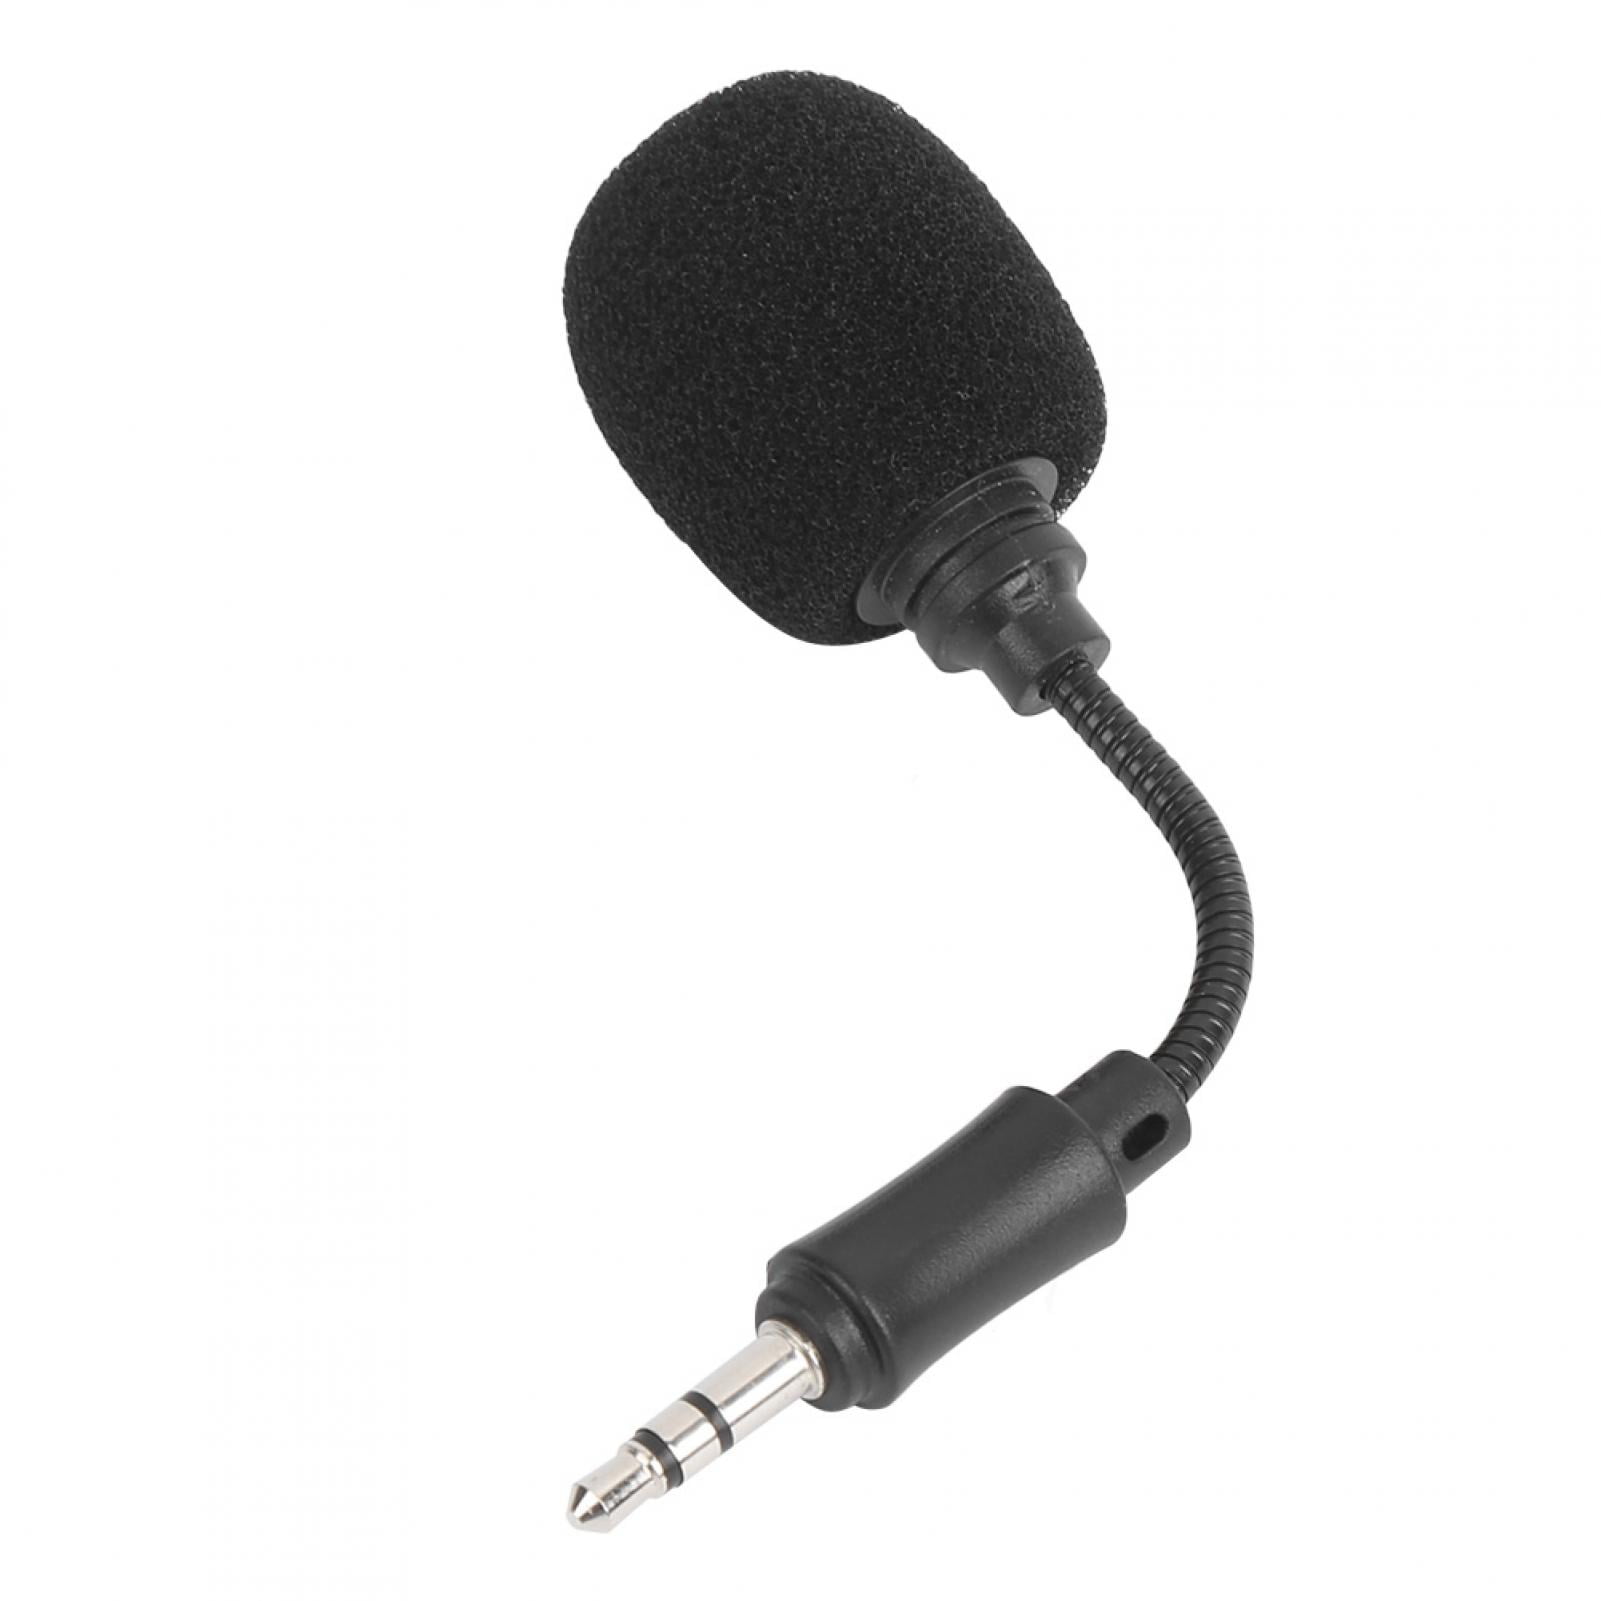 Easy to Carry and Store Portable Microphone Professional Manufacturing Fine Workmanship Black Microphone for Mobile Phone/PC/Notebook Computer 